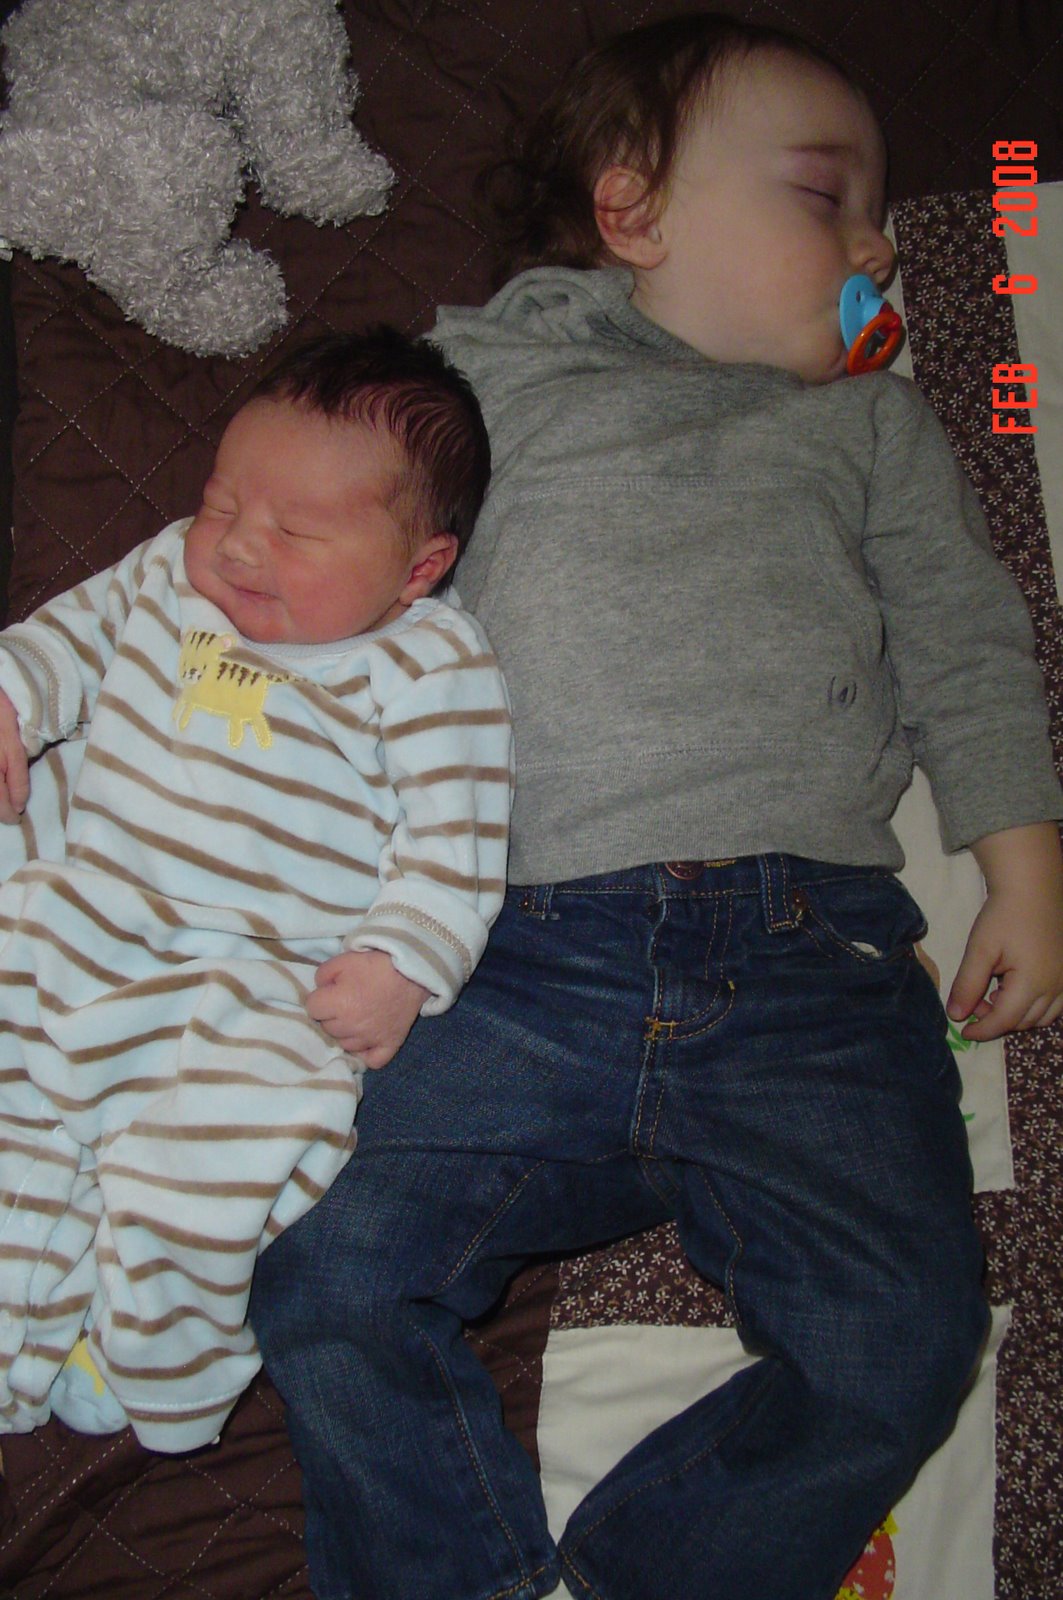 [Brothers+napping+together.jpg]